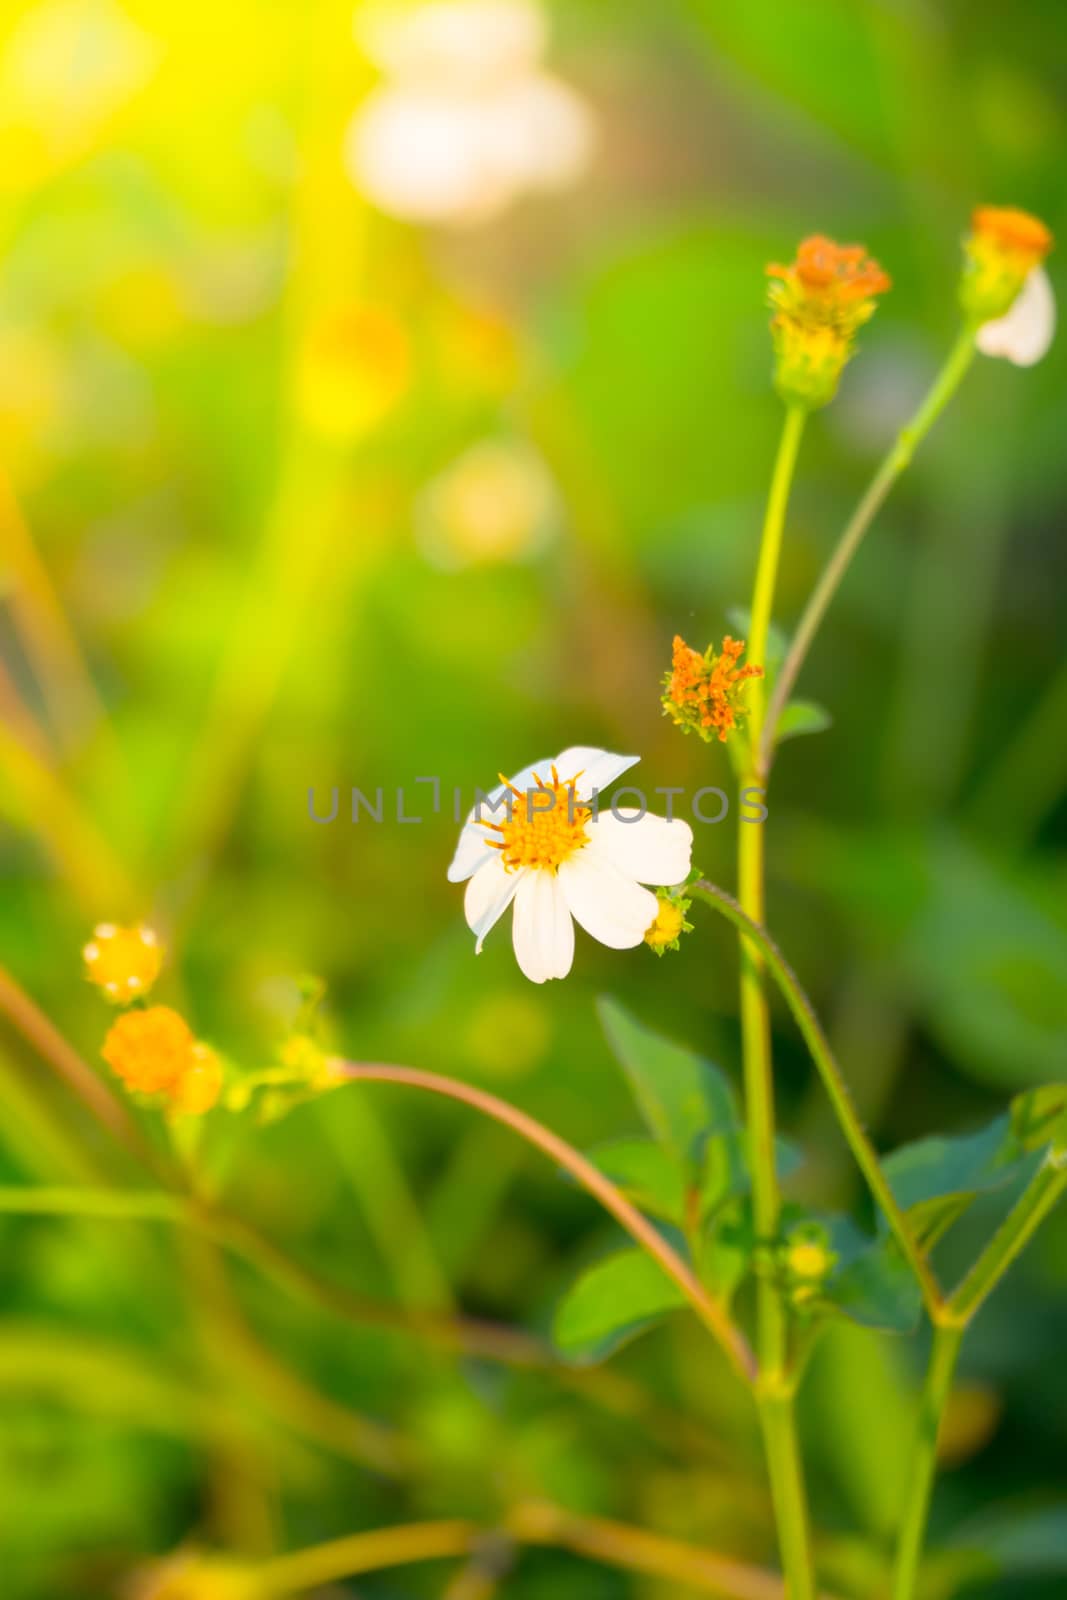 Grass flower causes the allergic symptoms, grass flowers for background.